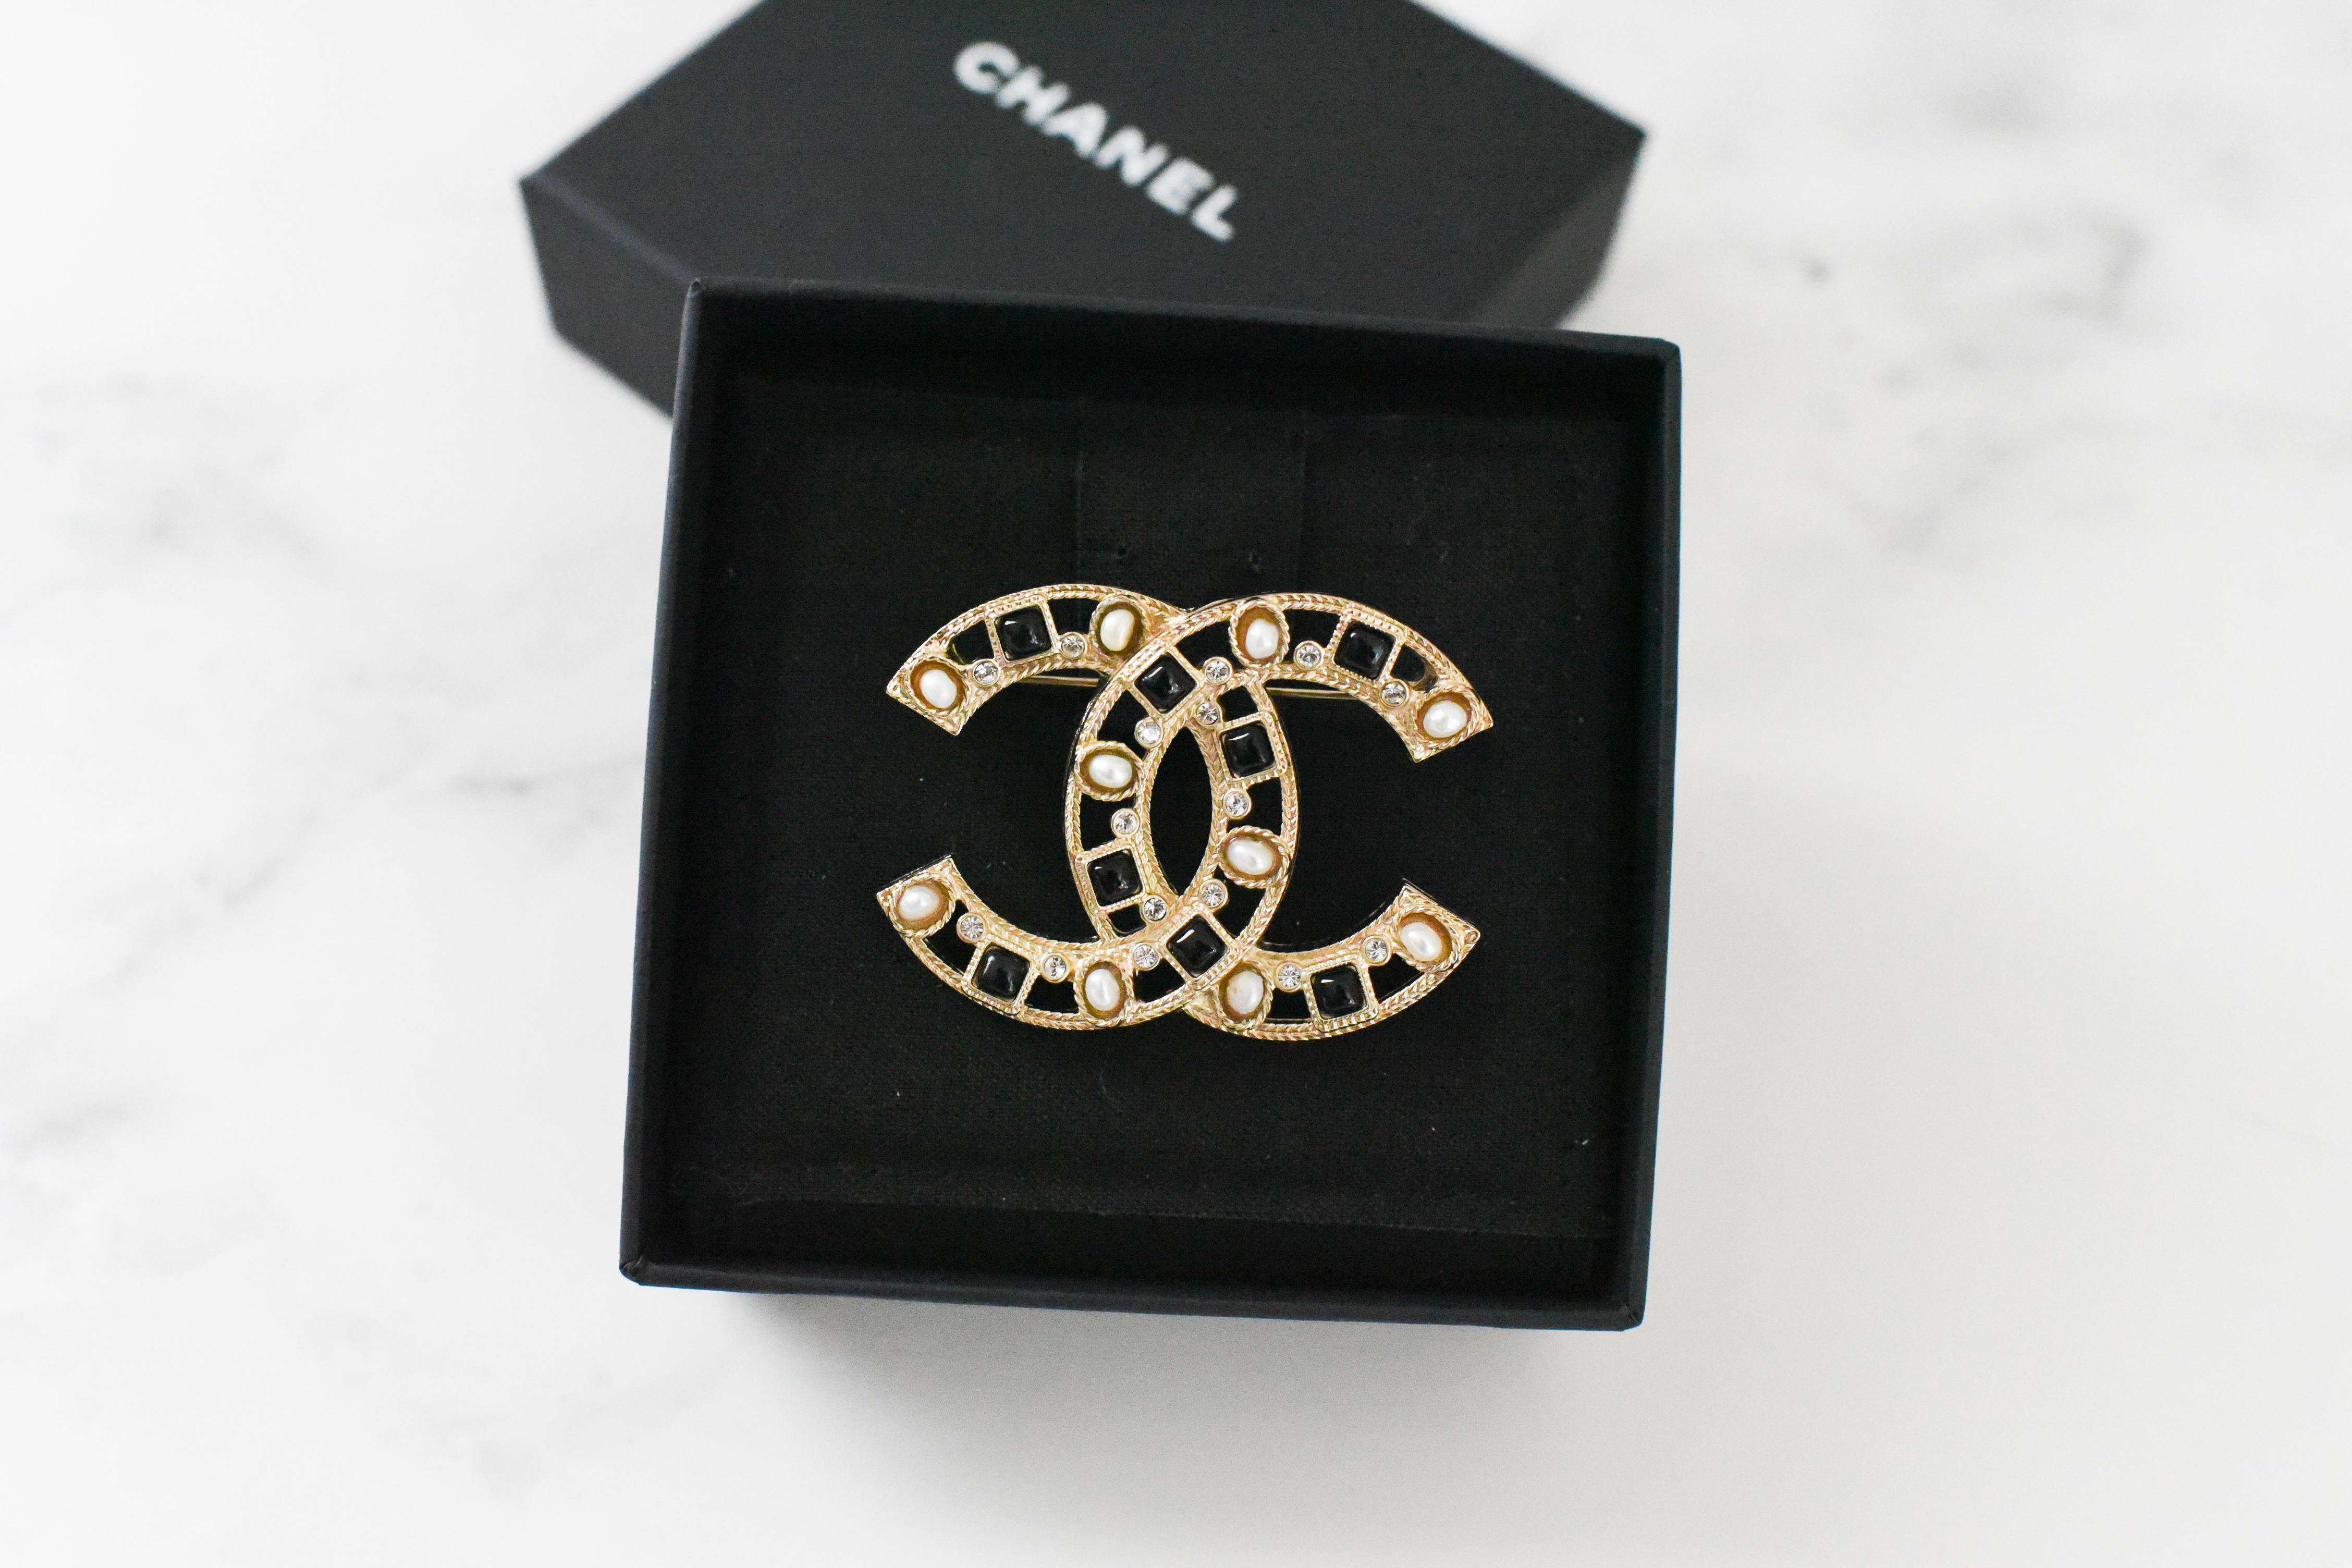 Chanel CC Brooch in Gold with Crystals, Pearls & Black Stones, New in Box  GA001